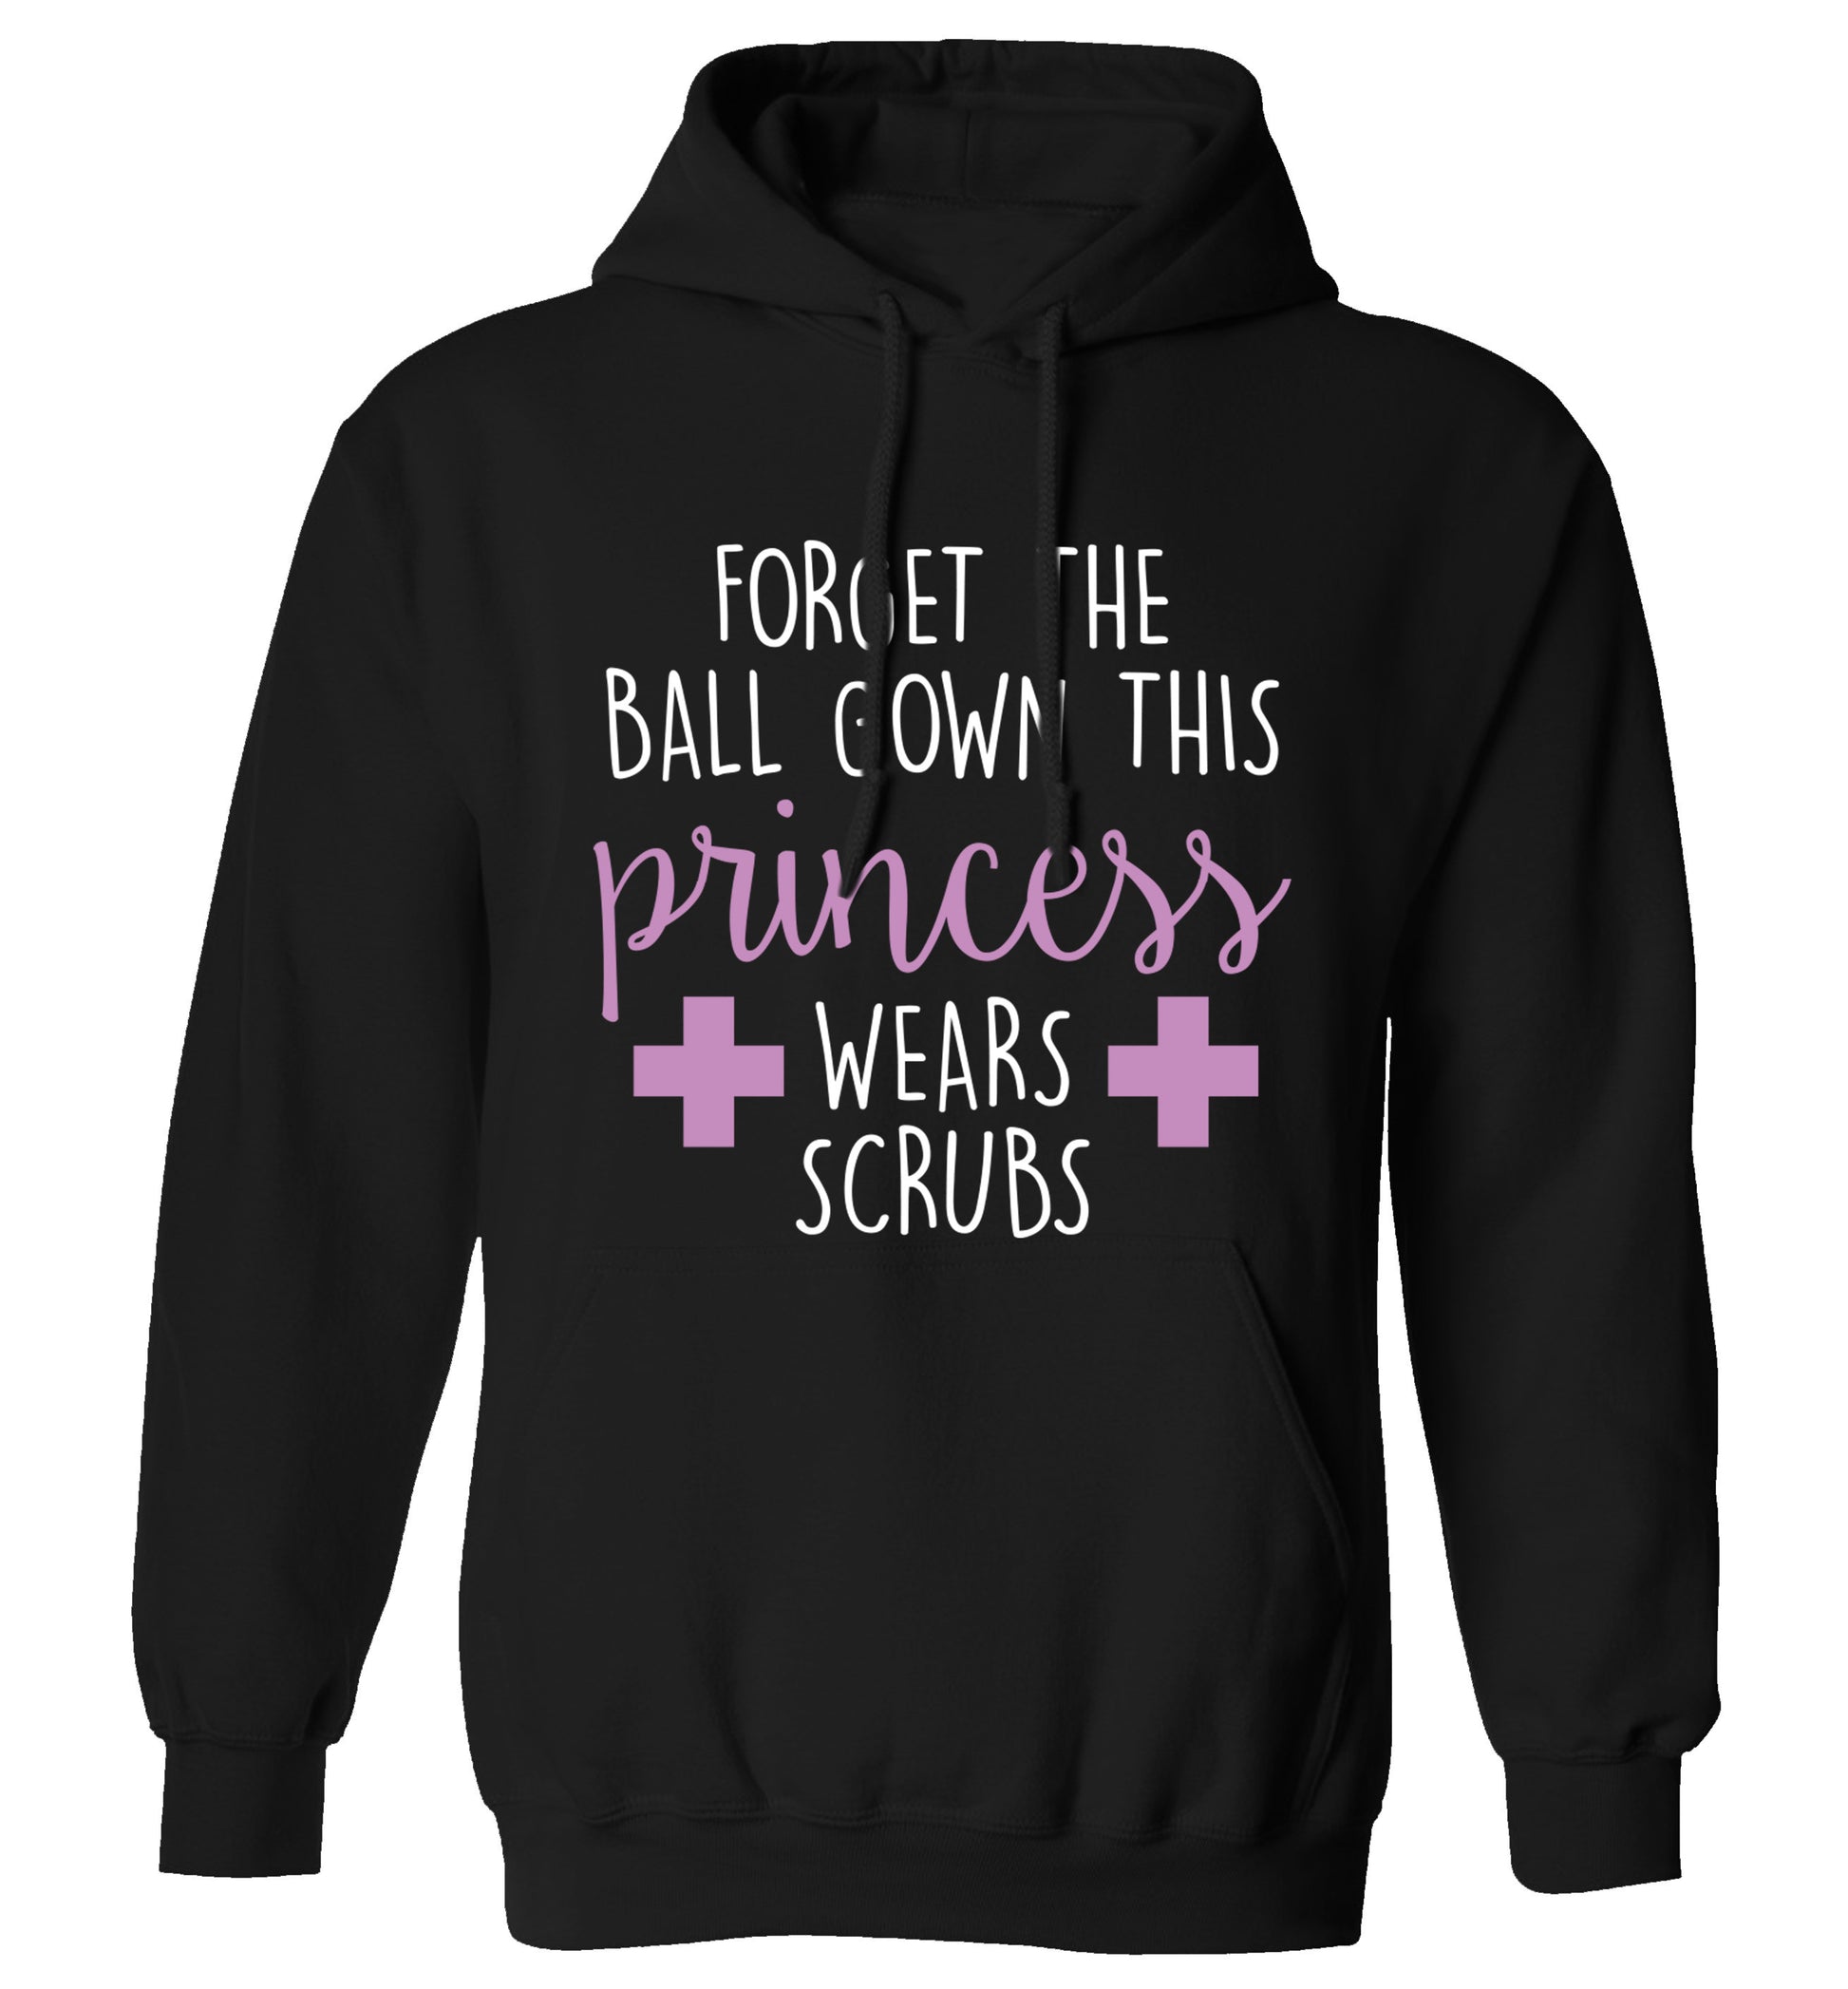 Forget the ball gown this princess wears scrubs adults unisex black hoodie 2XL